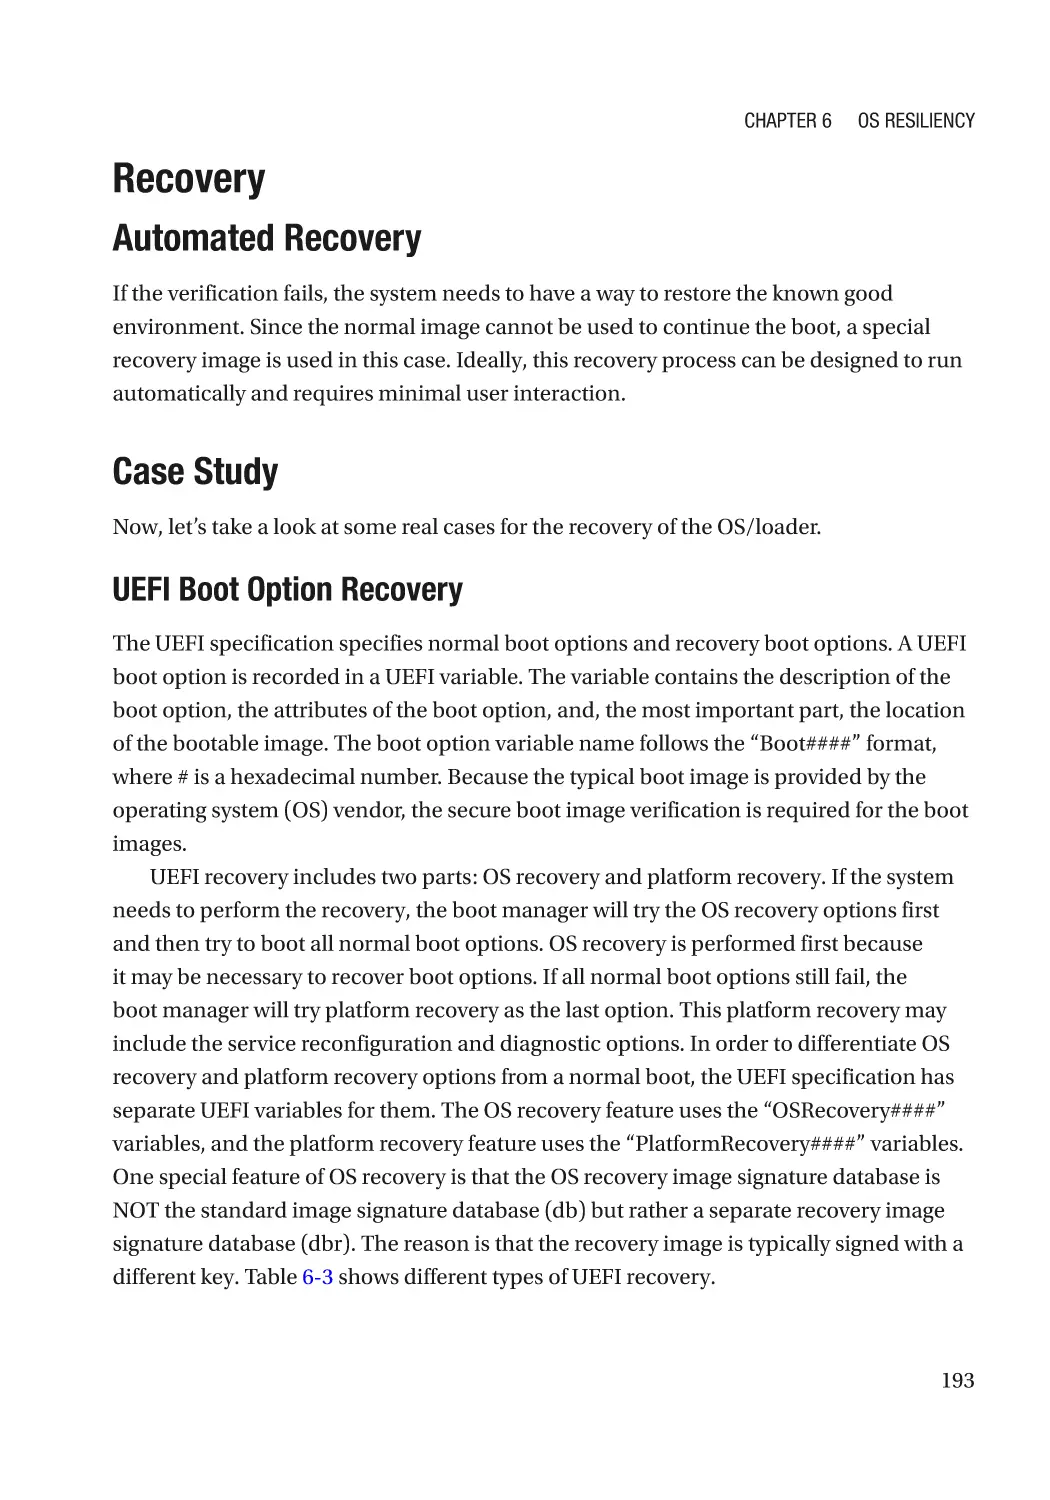 Recovery
Automated Recovery
Case Study
UEFI Boot Option Recovery